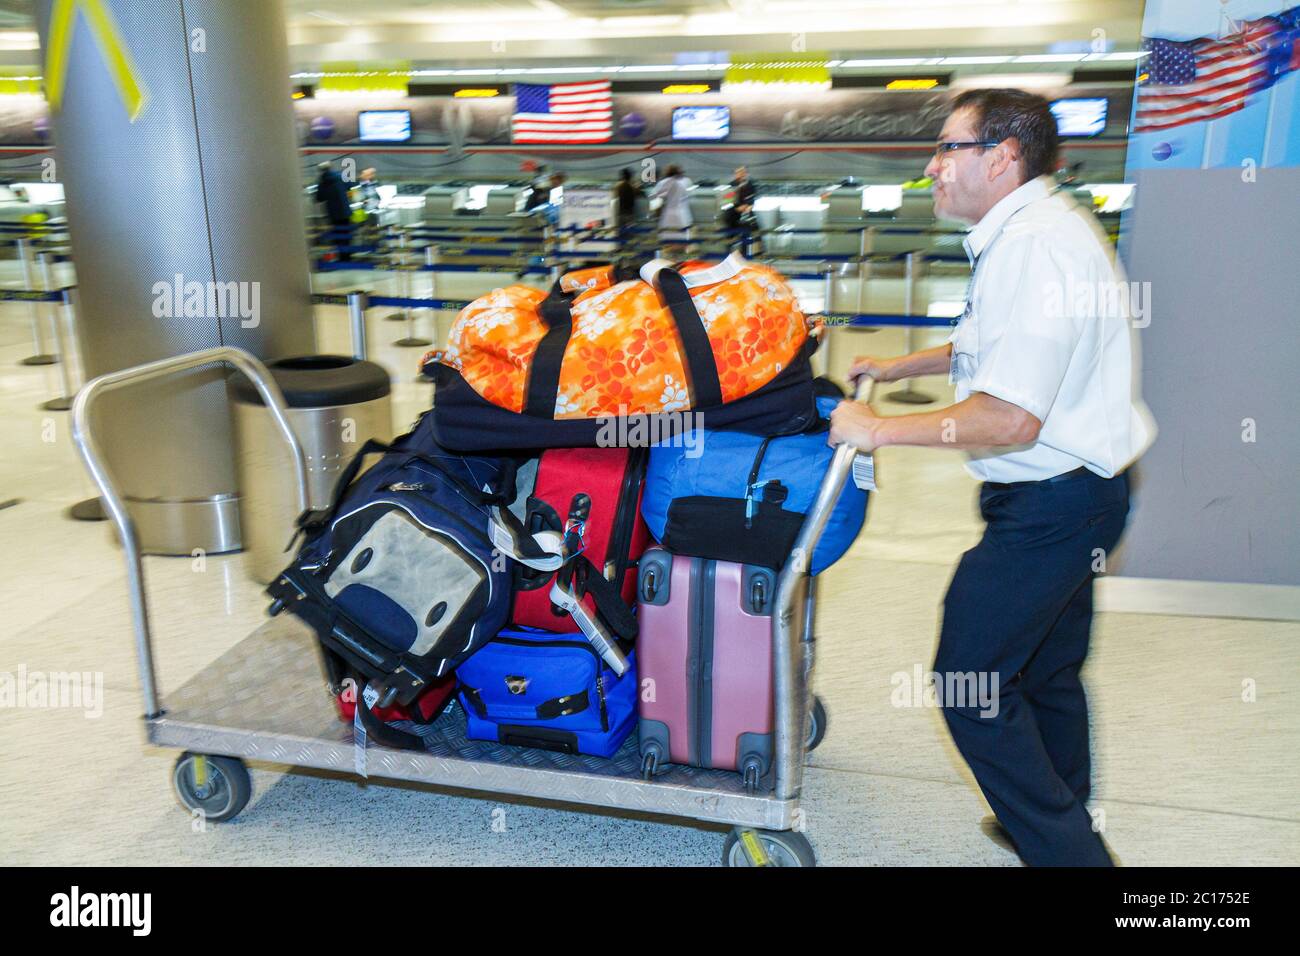 Miami Florida International Airport MIA,aviation,terminal,luggage,suitcase,baggage,stack,cart,carrier,man men male adult adults,pushing,working,work,s Stock Photo